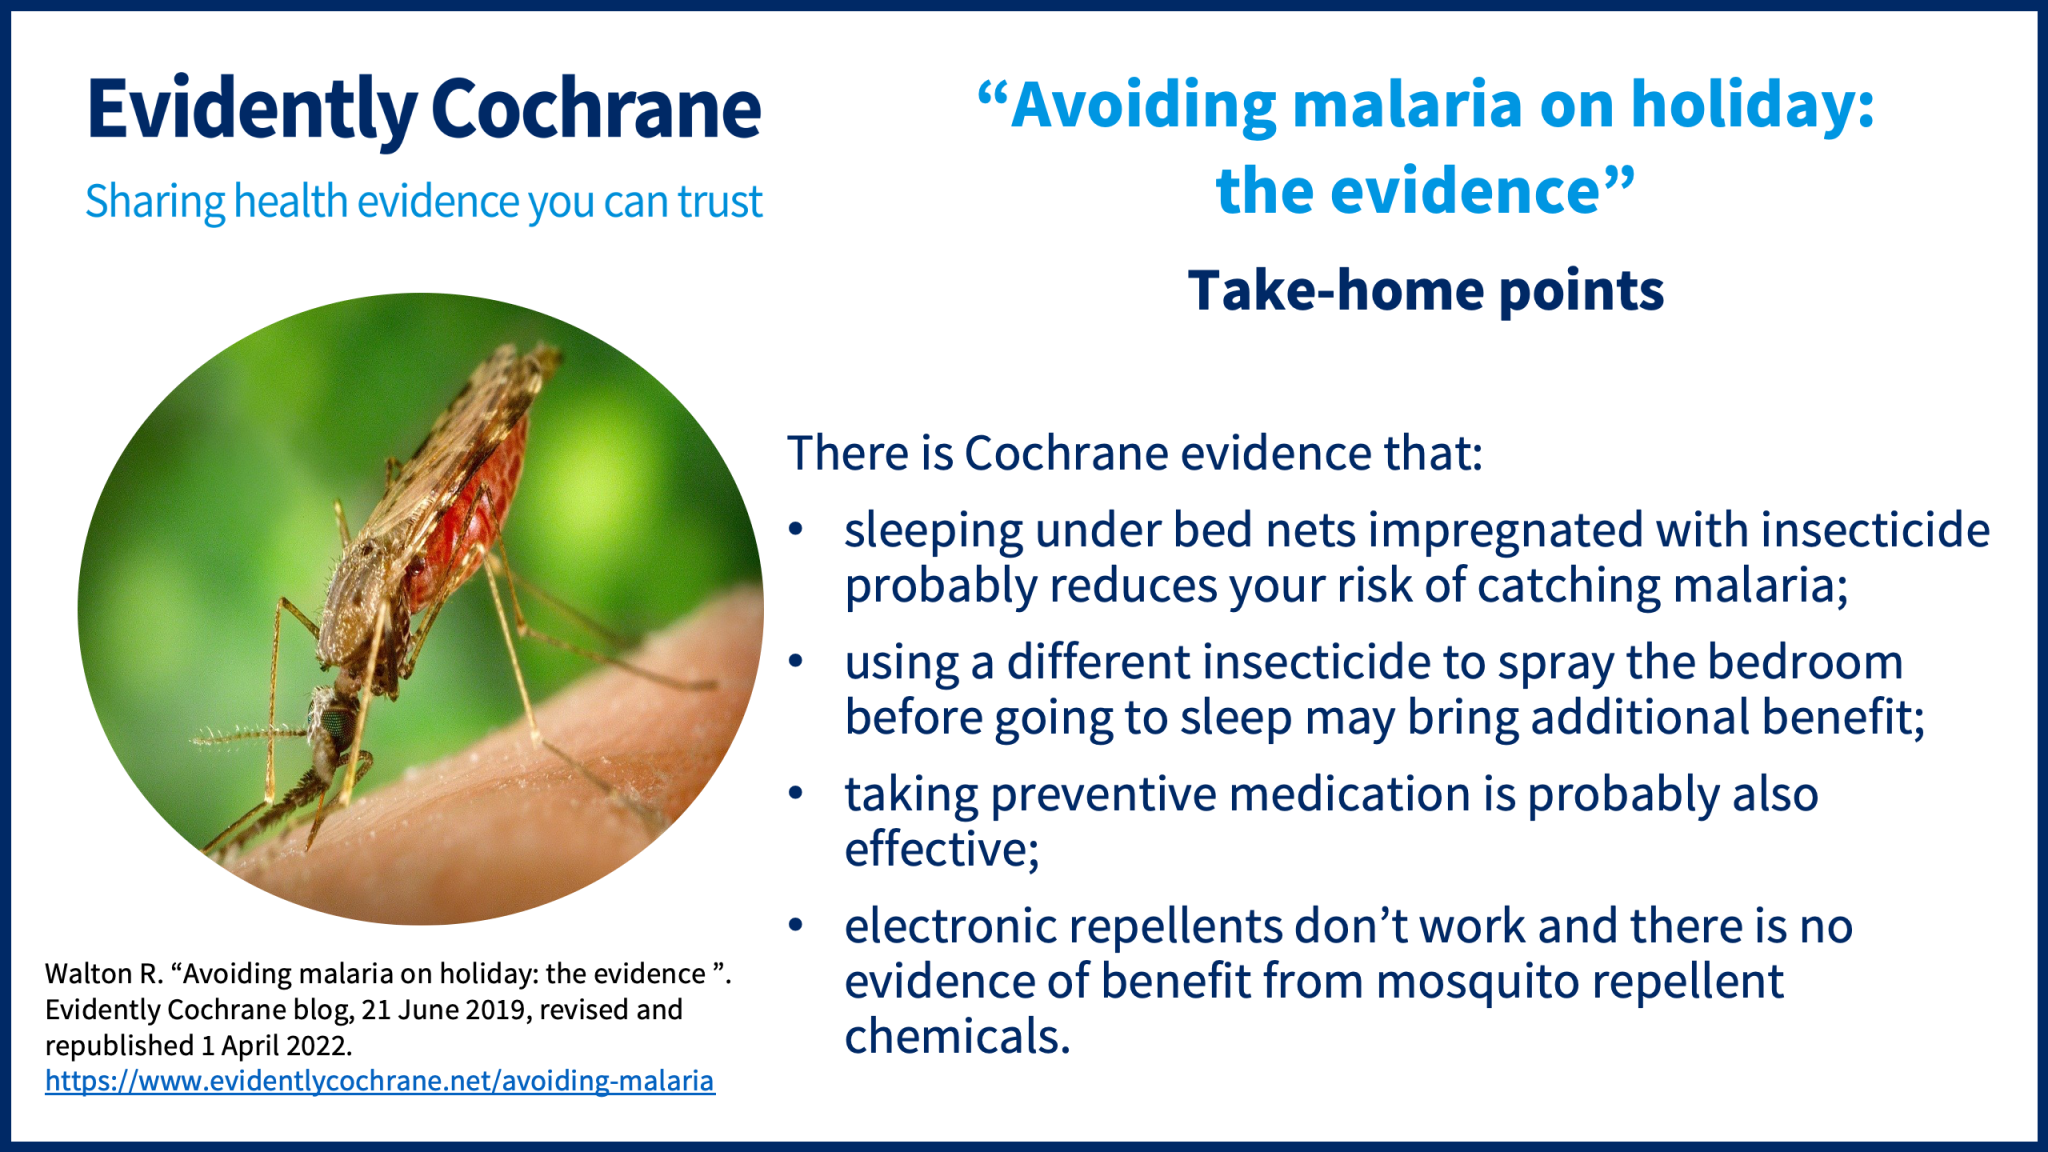 There is Cochrane evidence that: sleeping under bed nets impregnated with insecticide probably reduces your risk of catching malaria;  using a different insecticide to spray the bedroom before going to sleep may bring additional benefit; taking preventive medication is probably also effective; electronic repellents don’t work and there is no evidence of benefit from mosquito repellent chemicals.